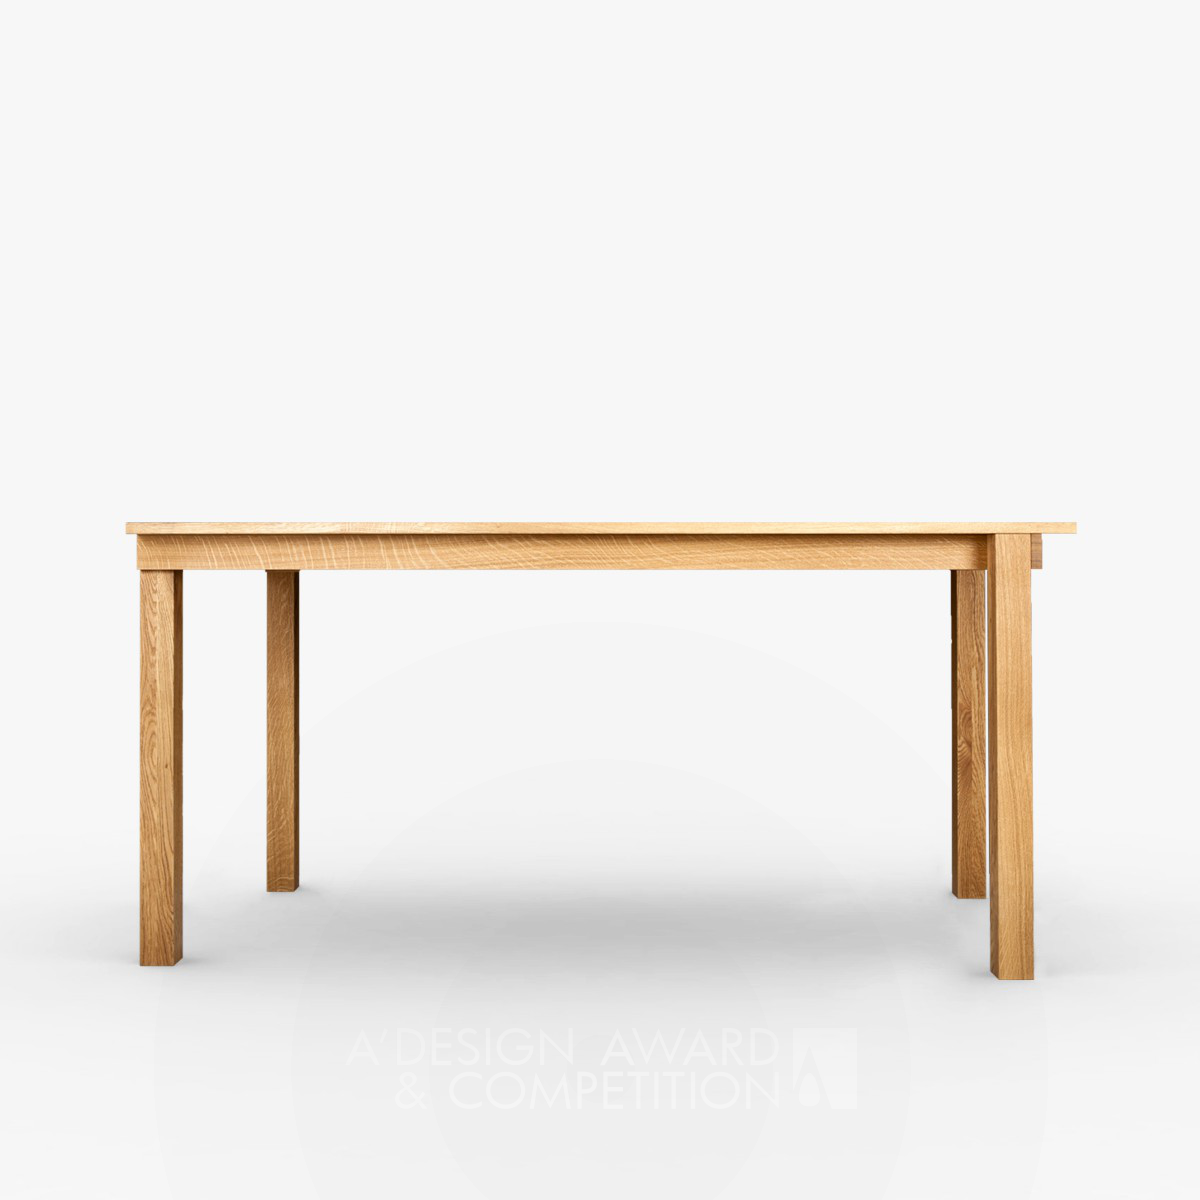 TwoStepTable Table by Christian Kim